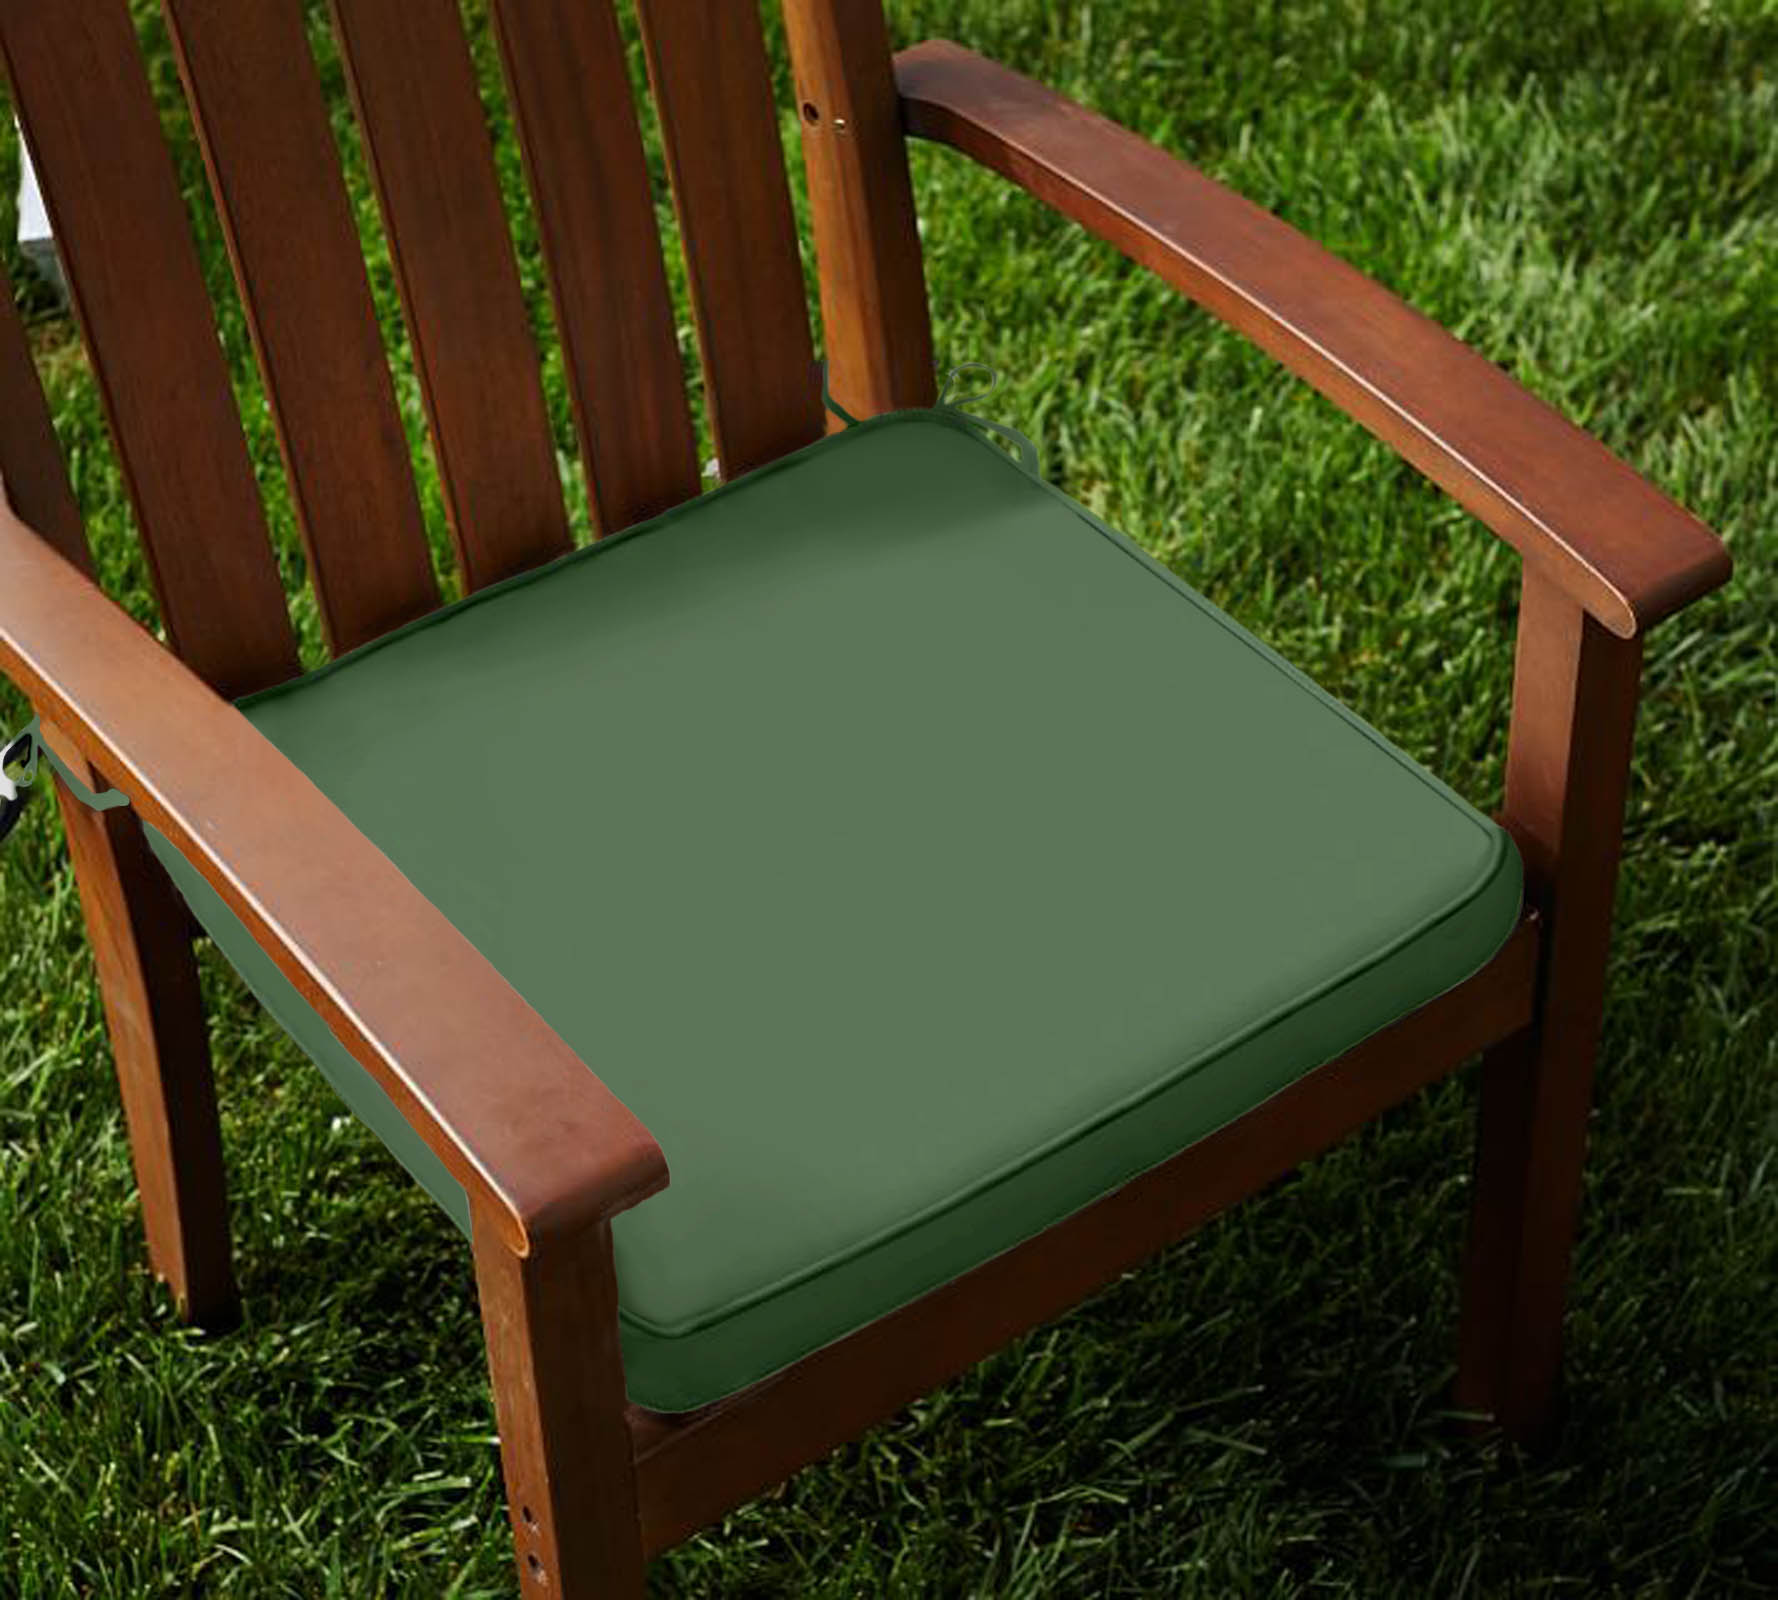 Buy Lushomes Cotton Vineyard Green Chair Pads with 4 Strings and Foam ...